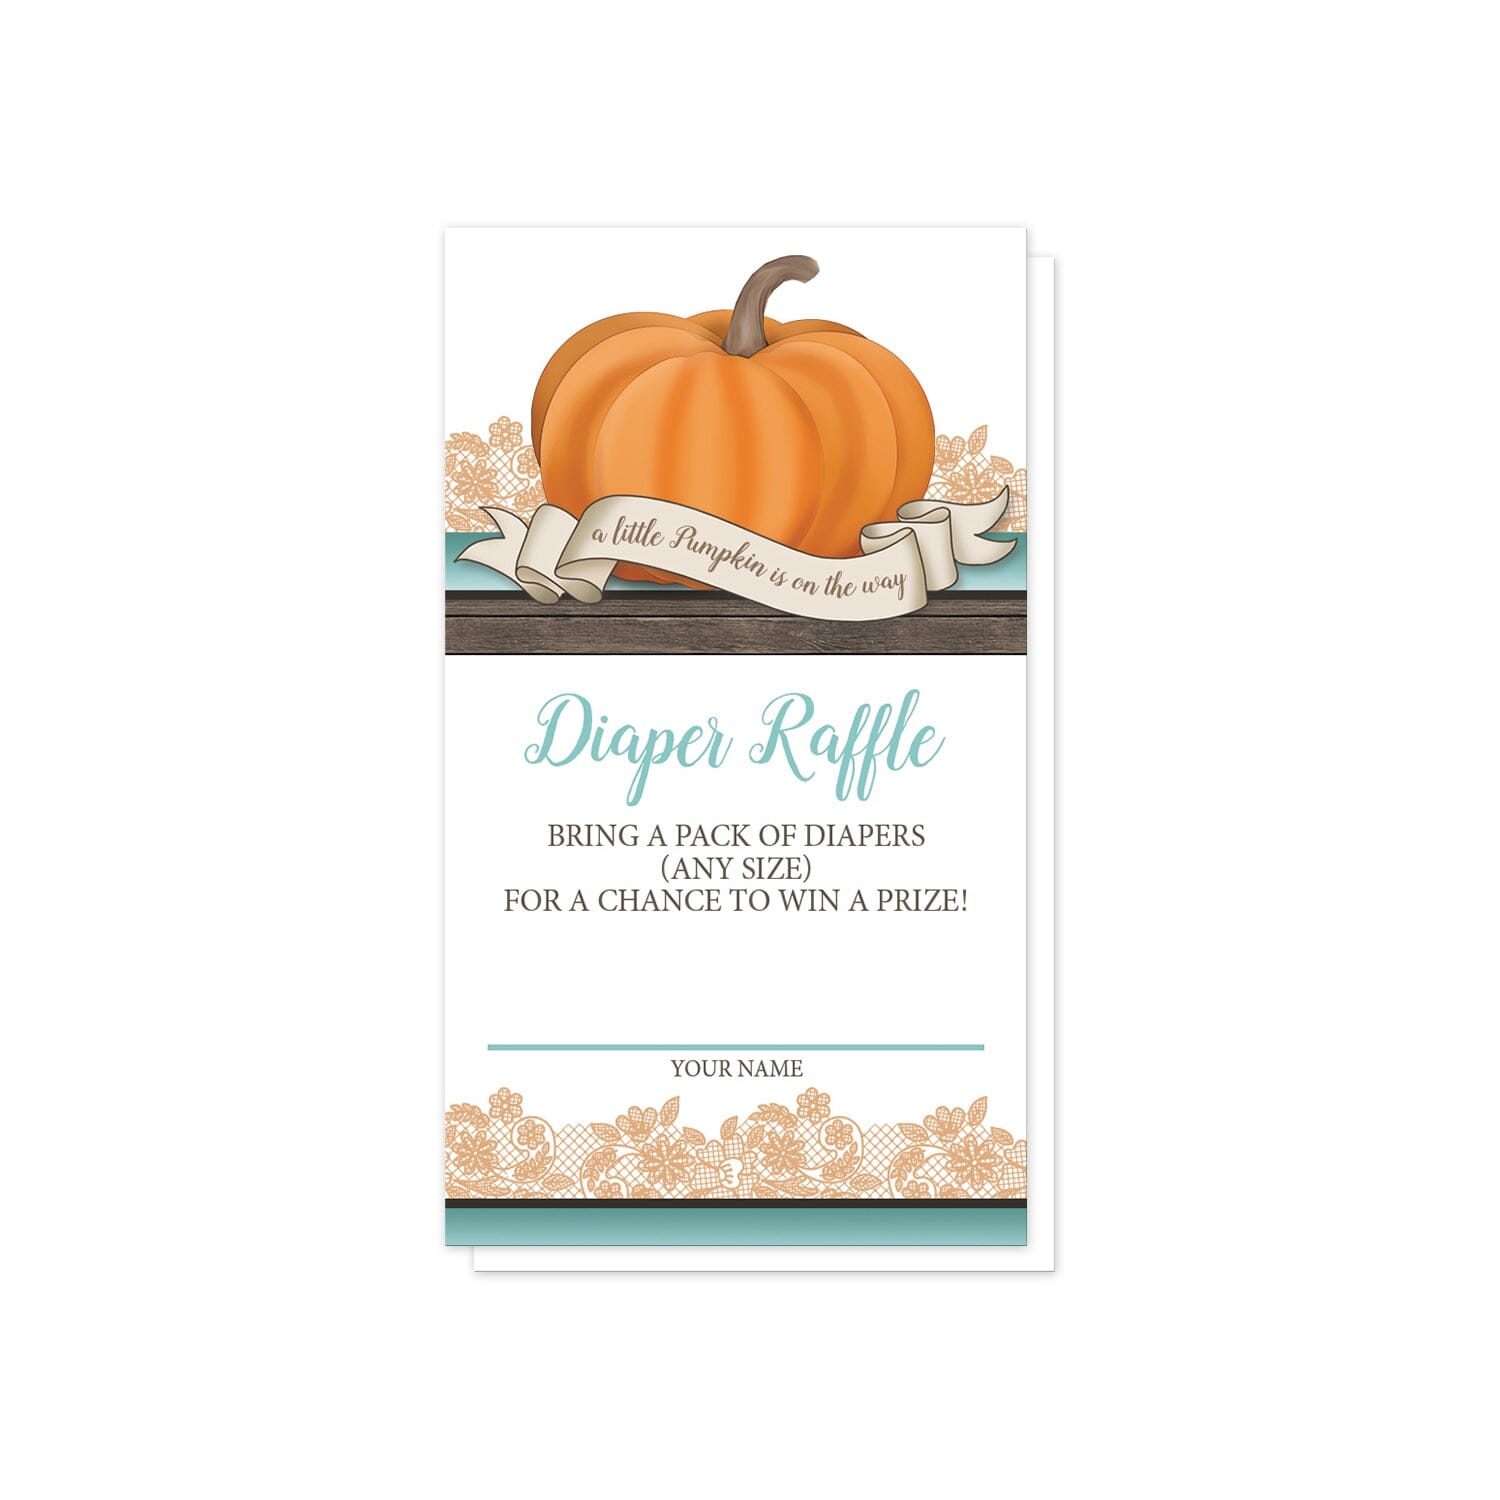 Rustic Orange Teal Pumpkin Diaper Raffle Cards at Artistically Invited. Cute rustic orange teal pumpkin diaper raffle cards with an illustration of an orange pumpkin on a horizontal teal stripe and a wood stripe with orange lace behind it, and a tiny ribbon banner that reads: "a little pumpkin is on the way". Your diaper raffle details are printed in teal and brown in the white area of the cards below the pumpkin. 